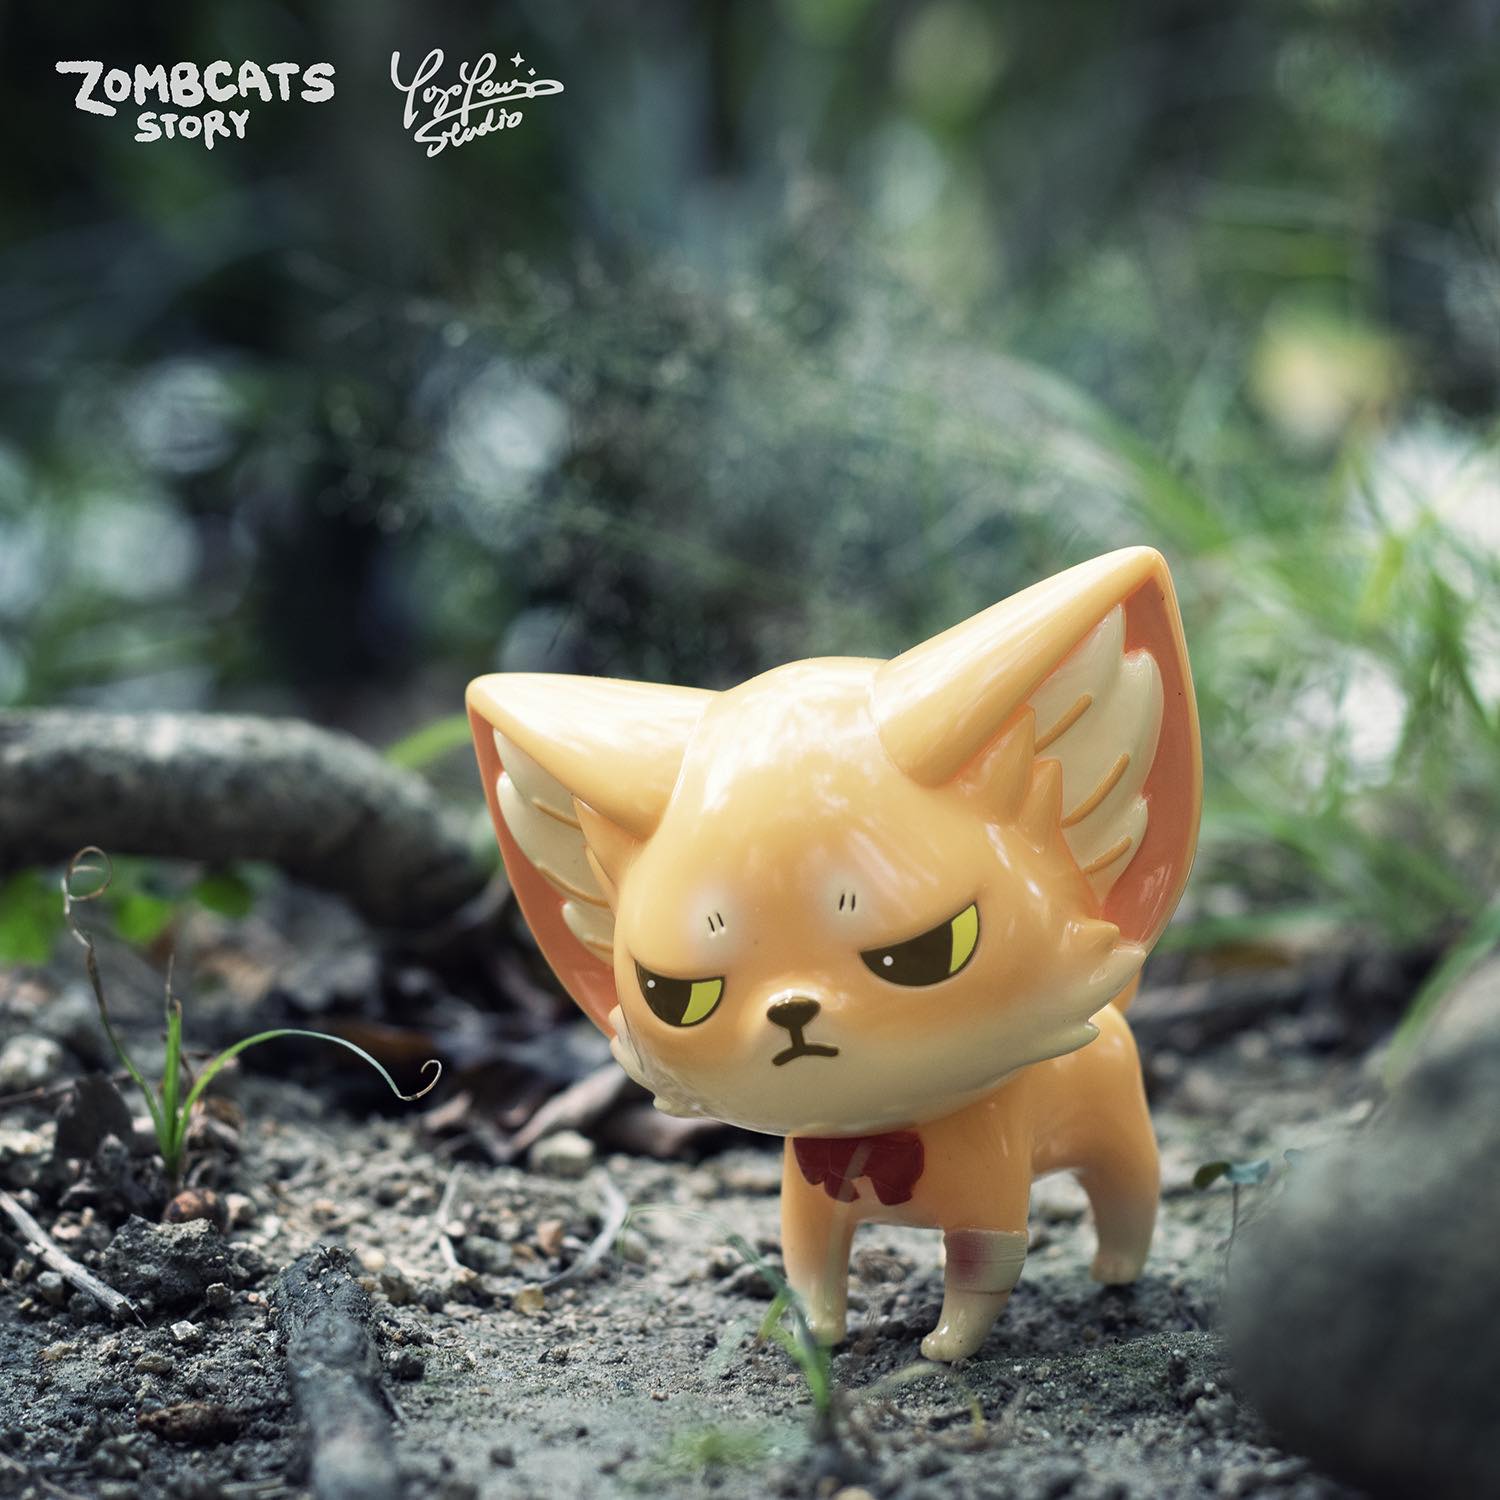 A limited edition Zombcat - Doomsday Biology Atlas - Doomsday Fox Kenneth vinyl toy by Morimei X Yoyo Yeung Studio. Features a detailed animal figure on the ground.